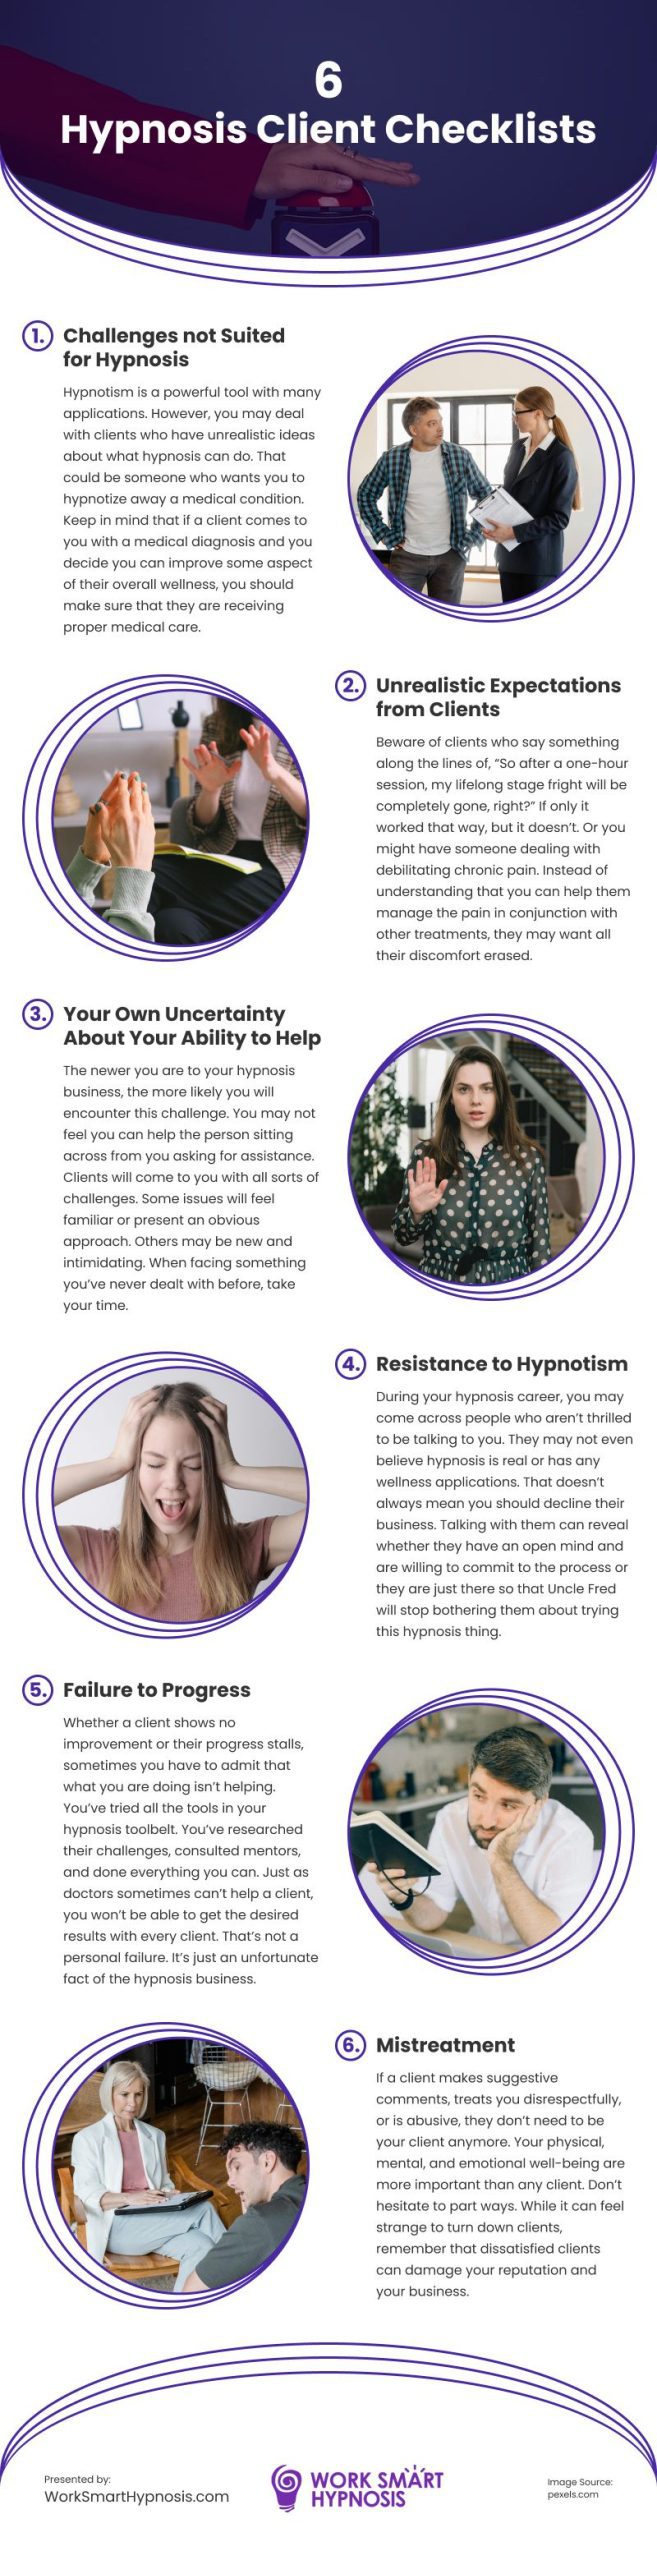 6 Hypnosis Client Checklists Infographic